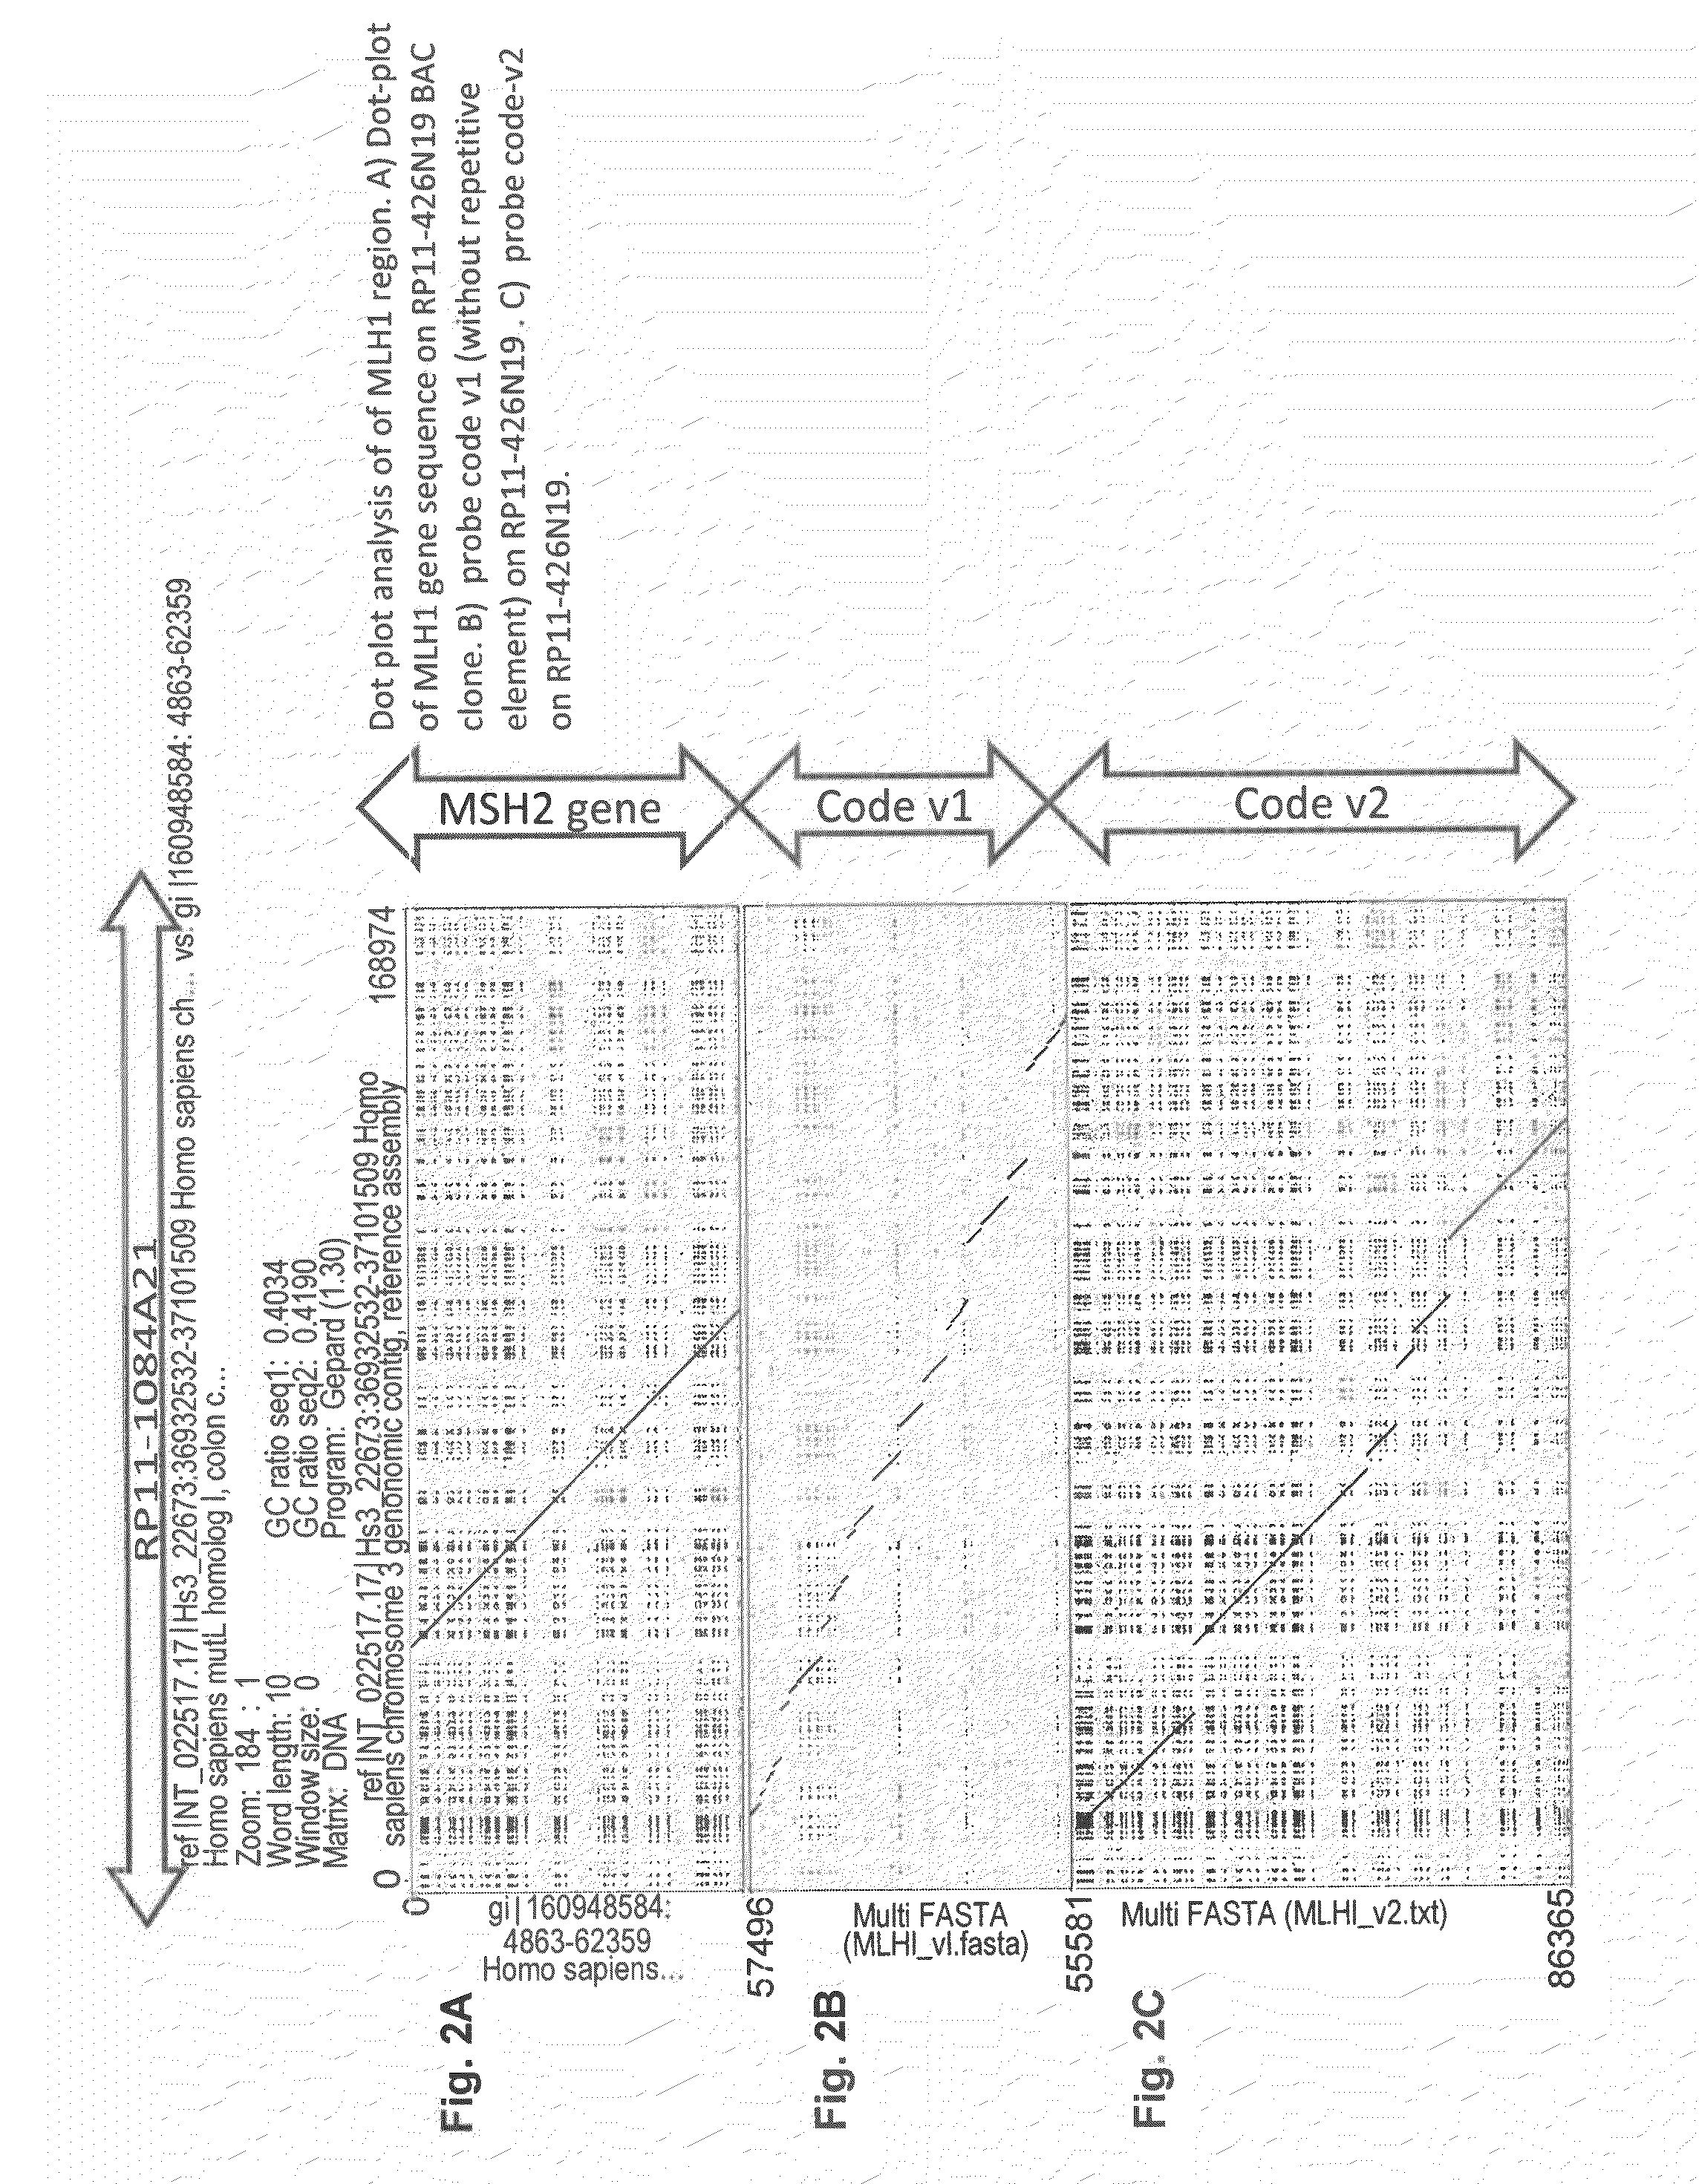 Method for identifying or detecting genomic rearrangements in a biological sample